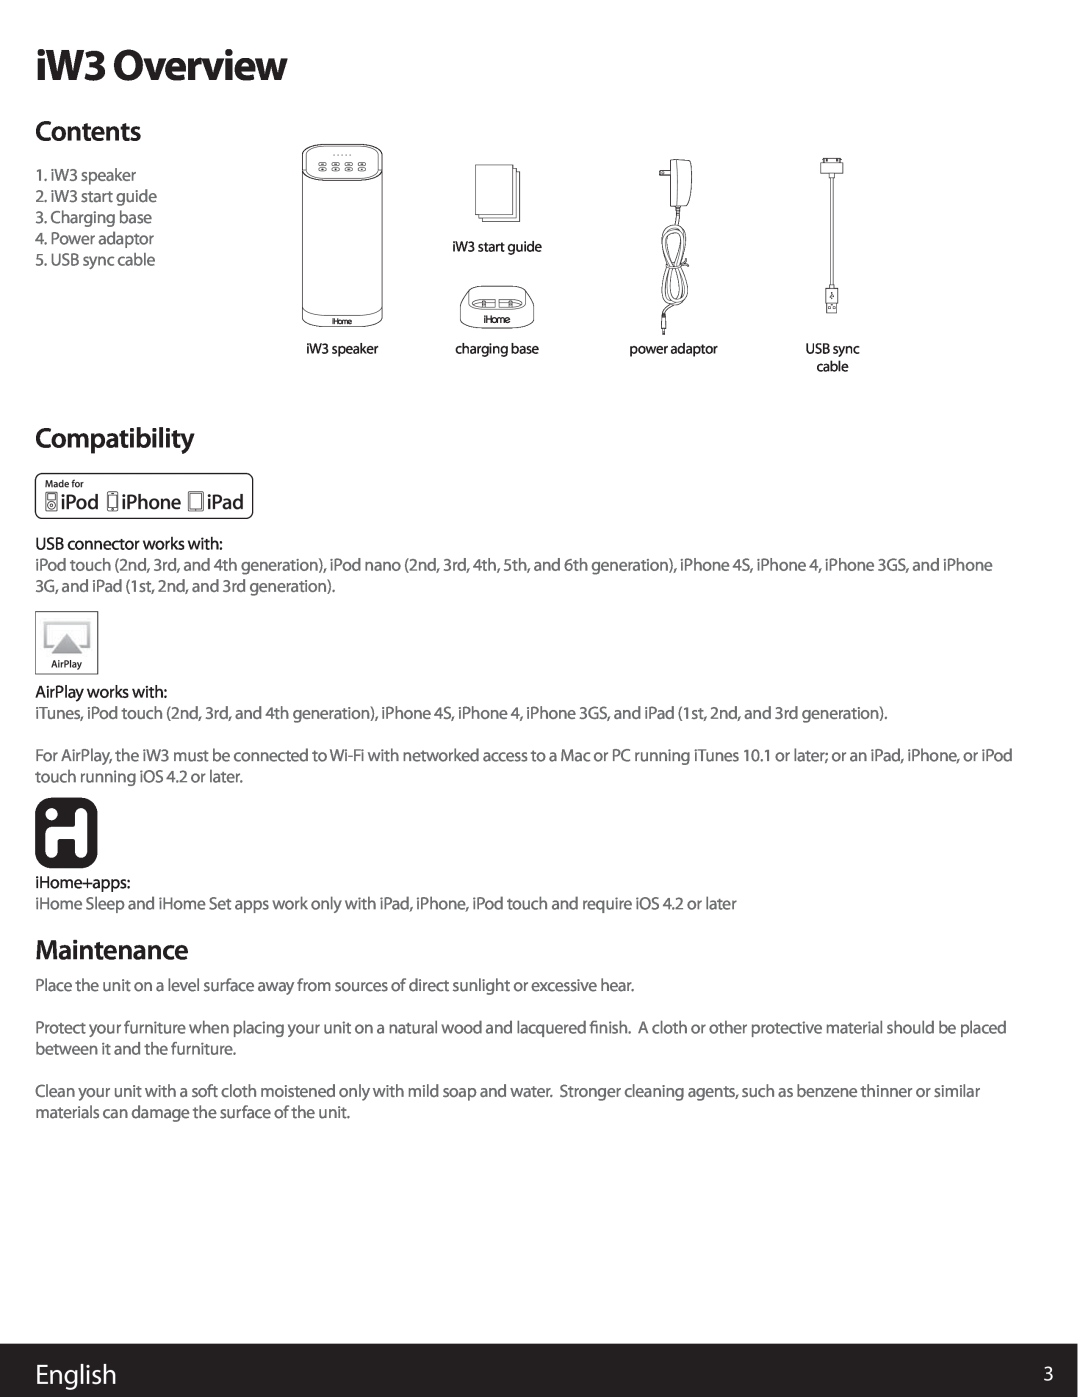 iHome user manual iW3 Overview, Contents, Compatibility, Maintenance, English 